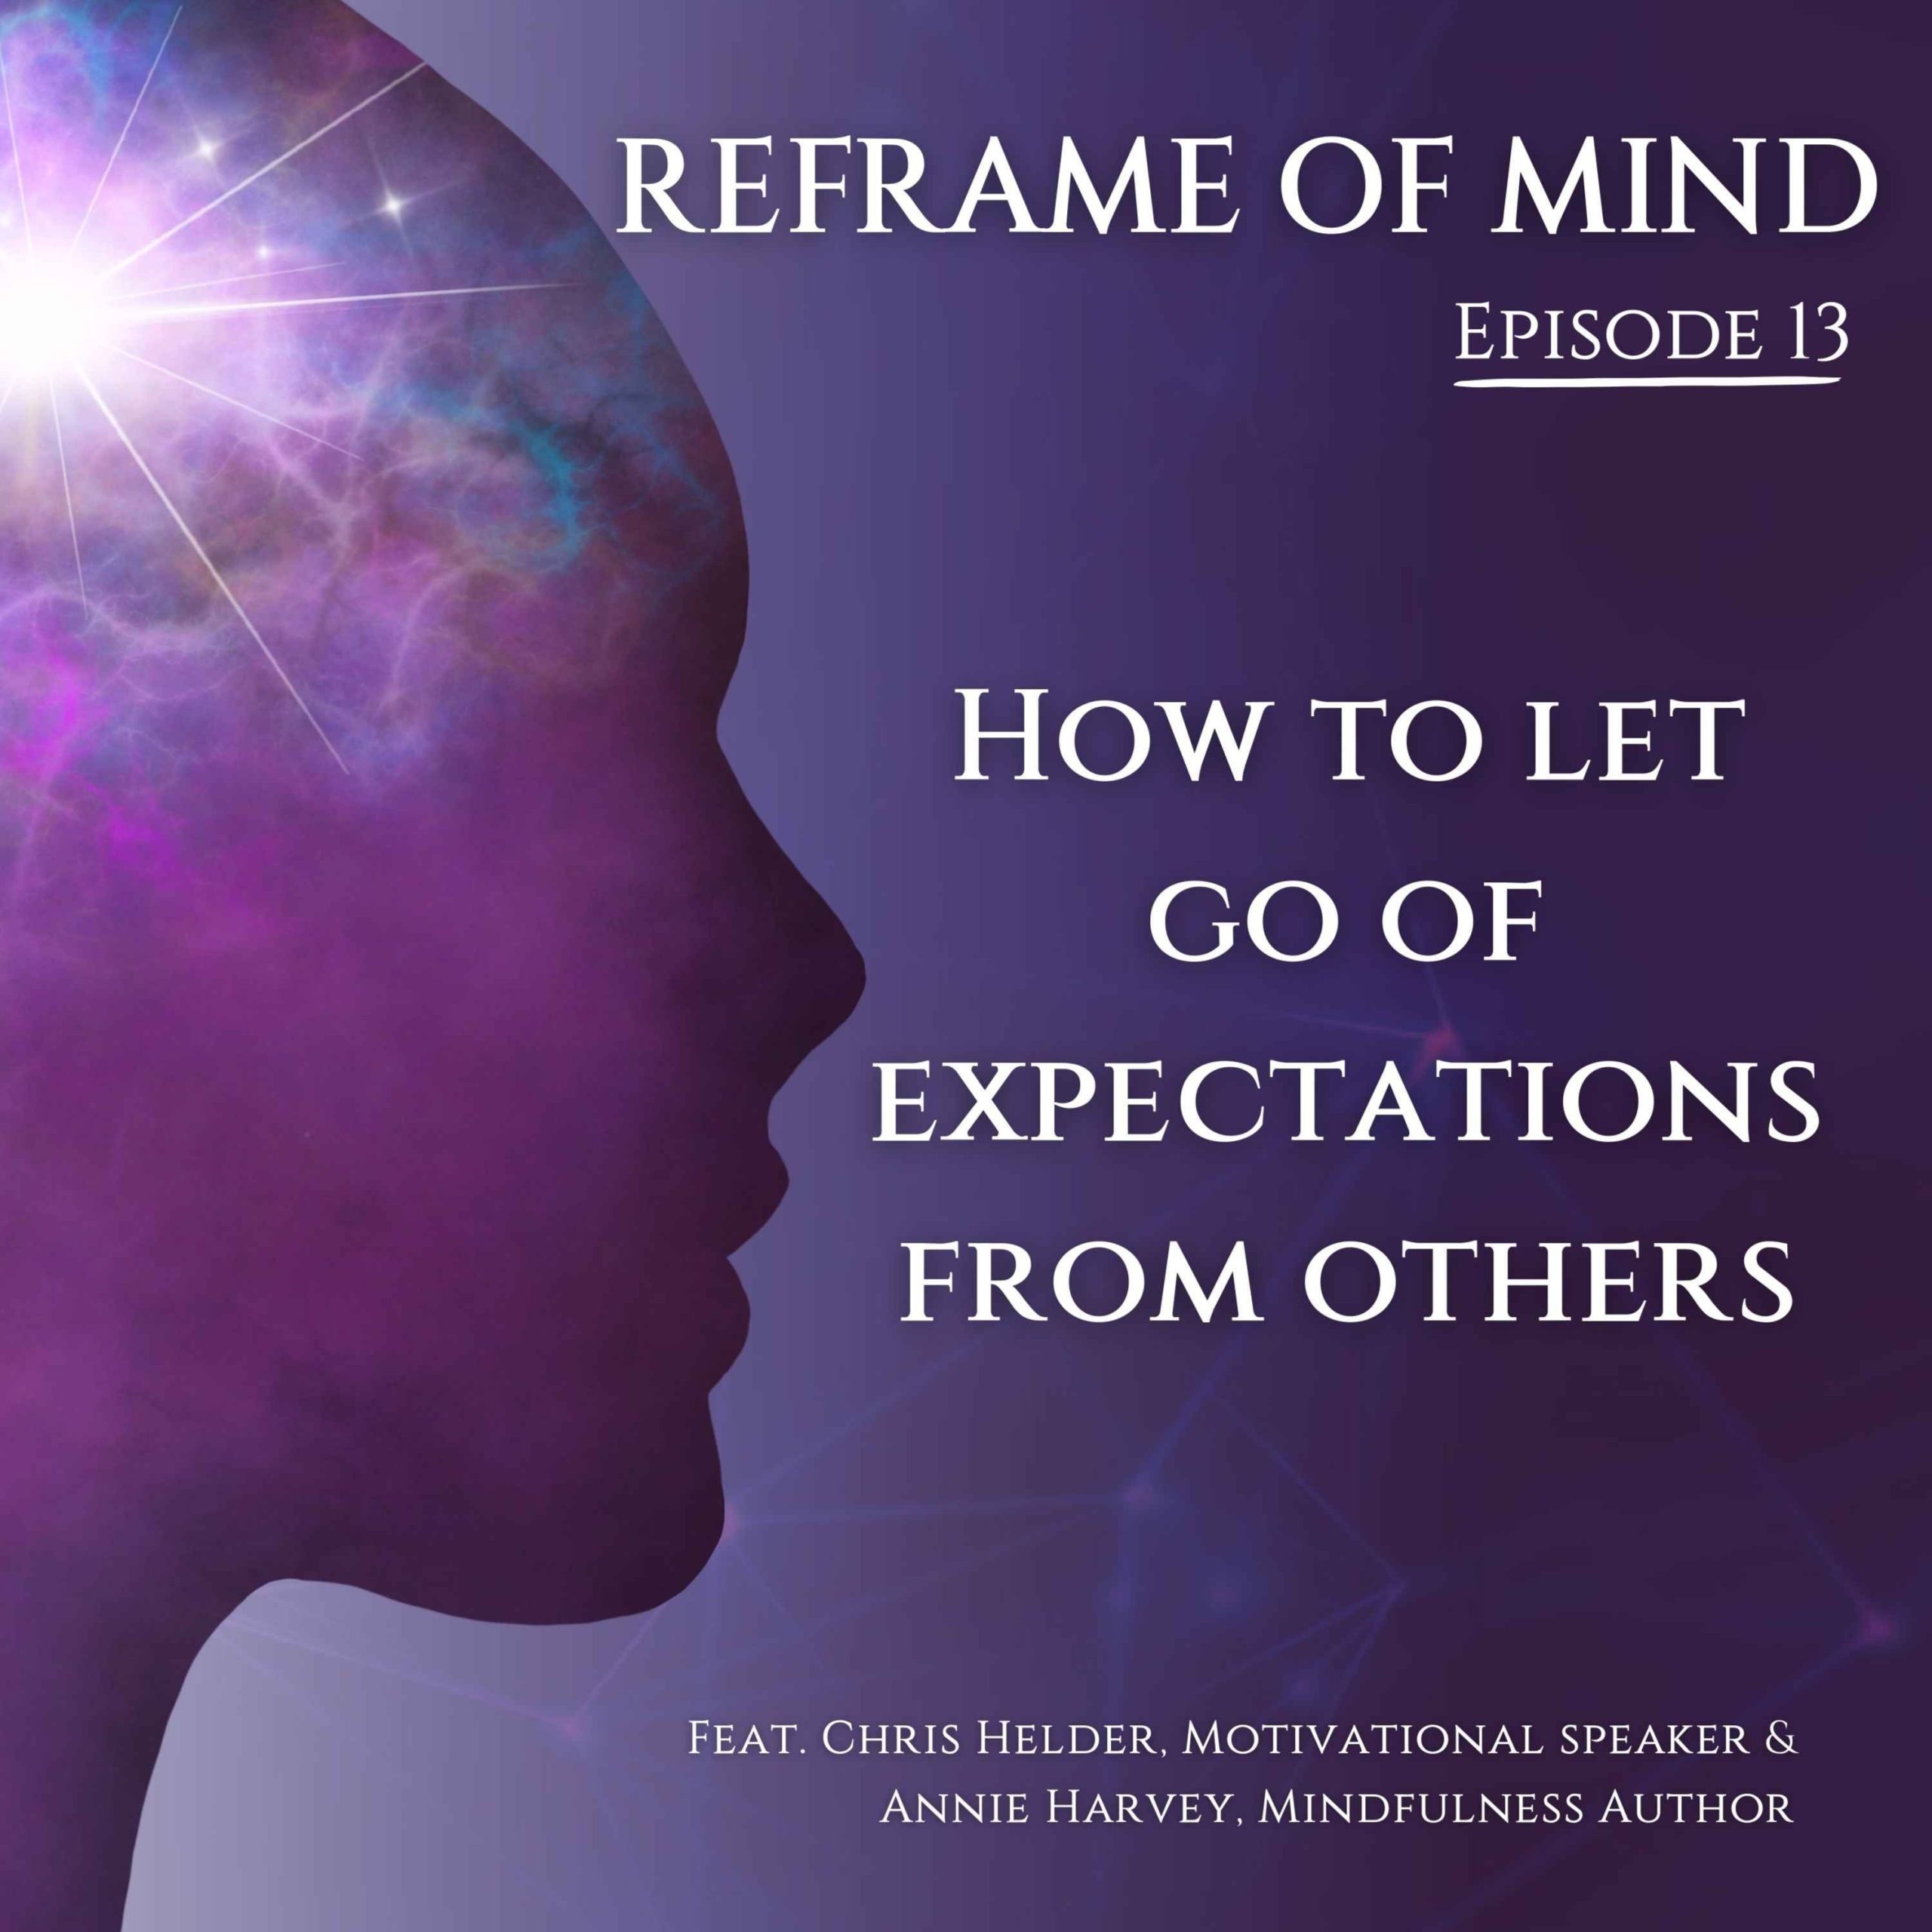 How to let go of expectations from others